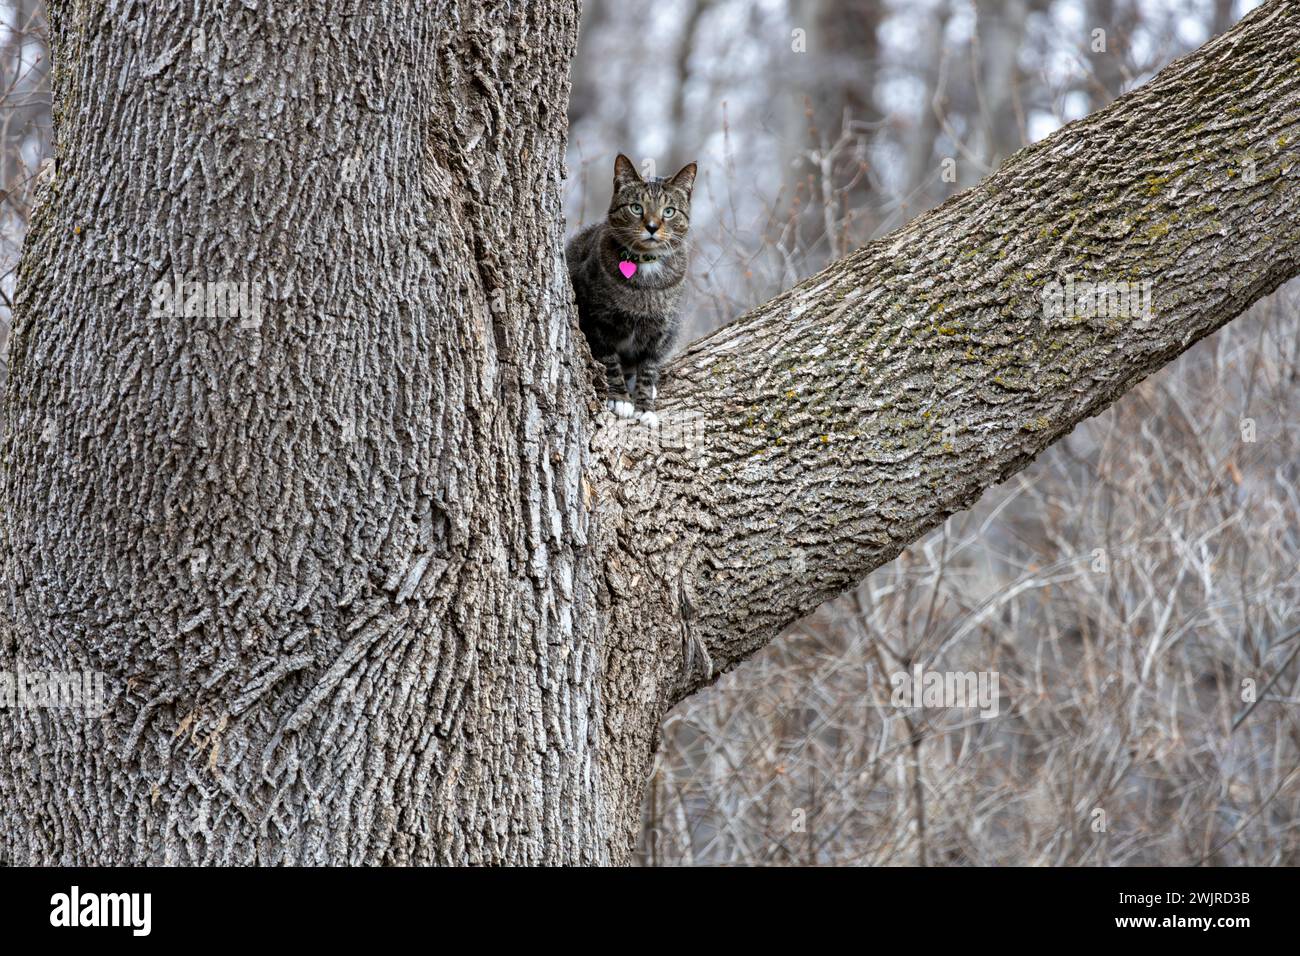 Gray tabby cat with white paws sitting on the branch of a mature ash tree, on an overcast winter day, looking at camera Stock Photo